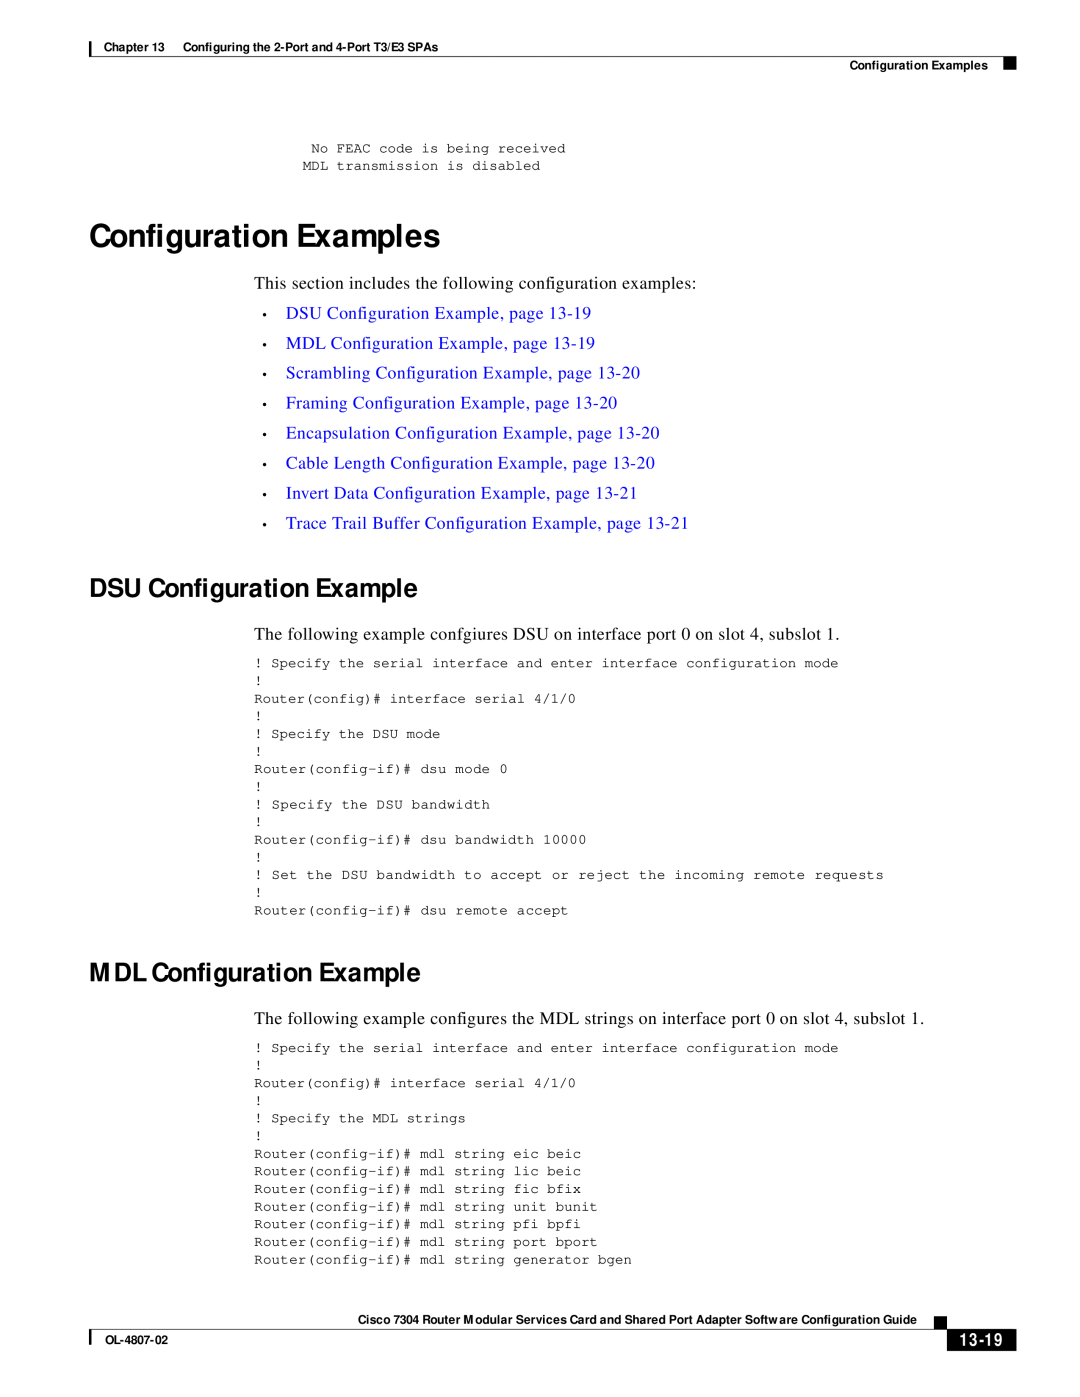 Cisco Systems 7304 manual Configuration Examples, DSU Configuration Example, MDL Configuration Example, 13-19 